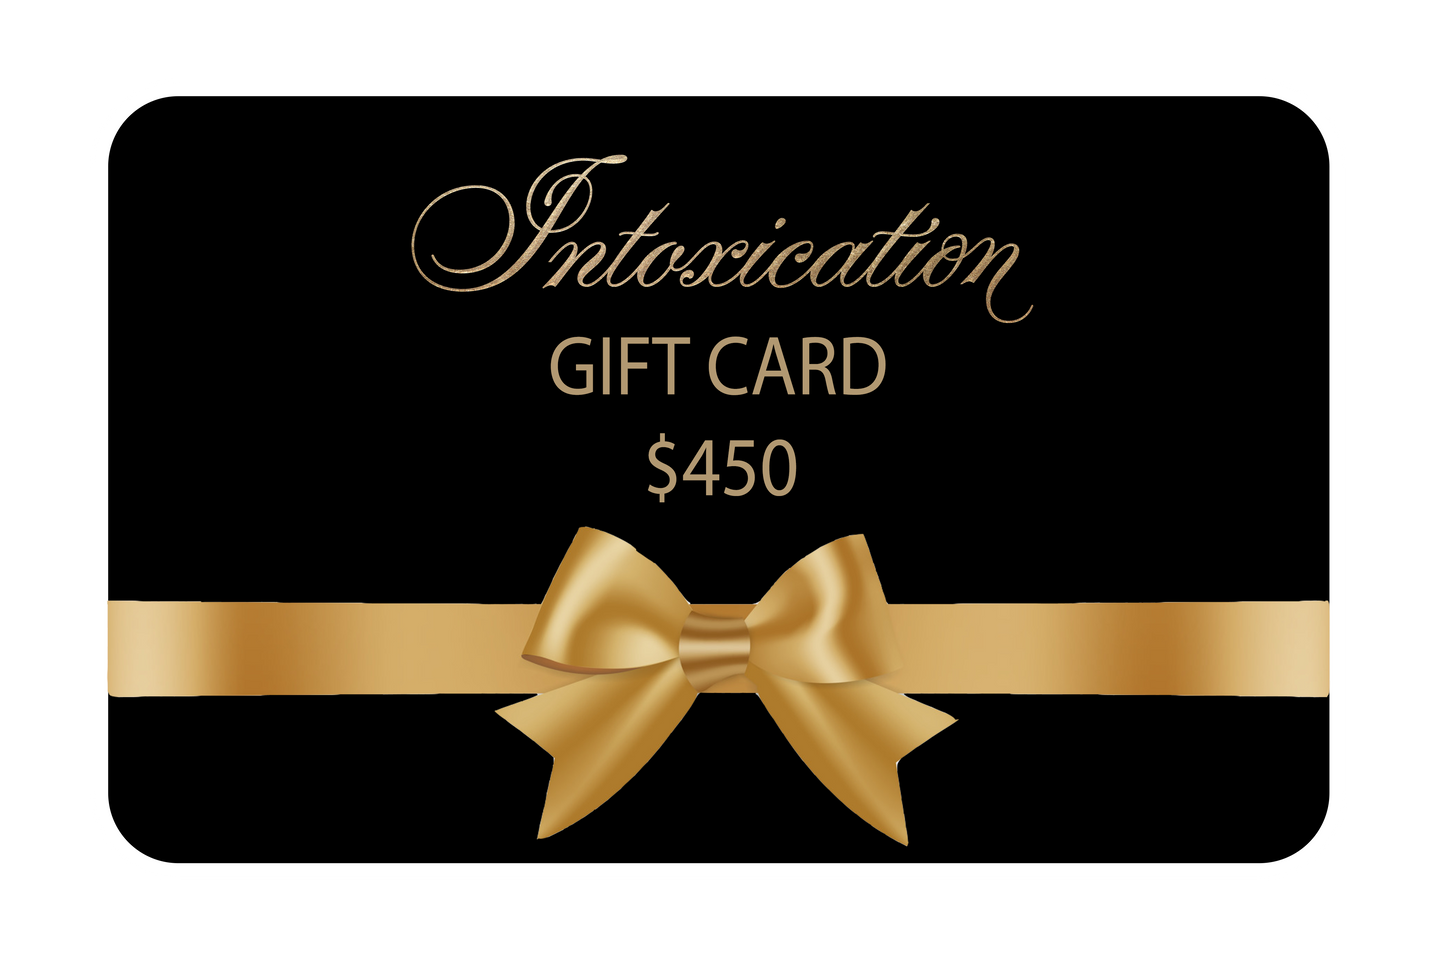 Intoxication Gift Card